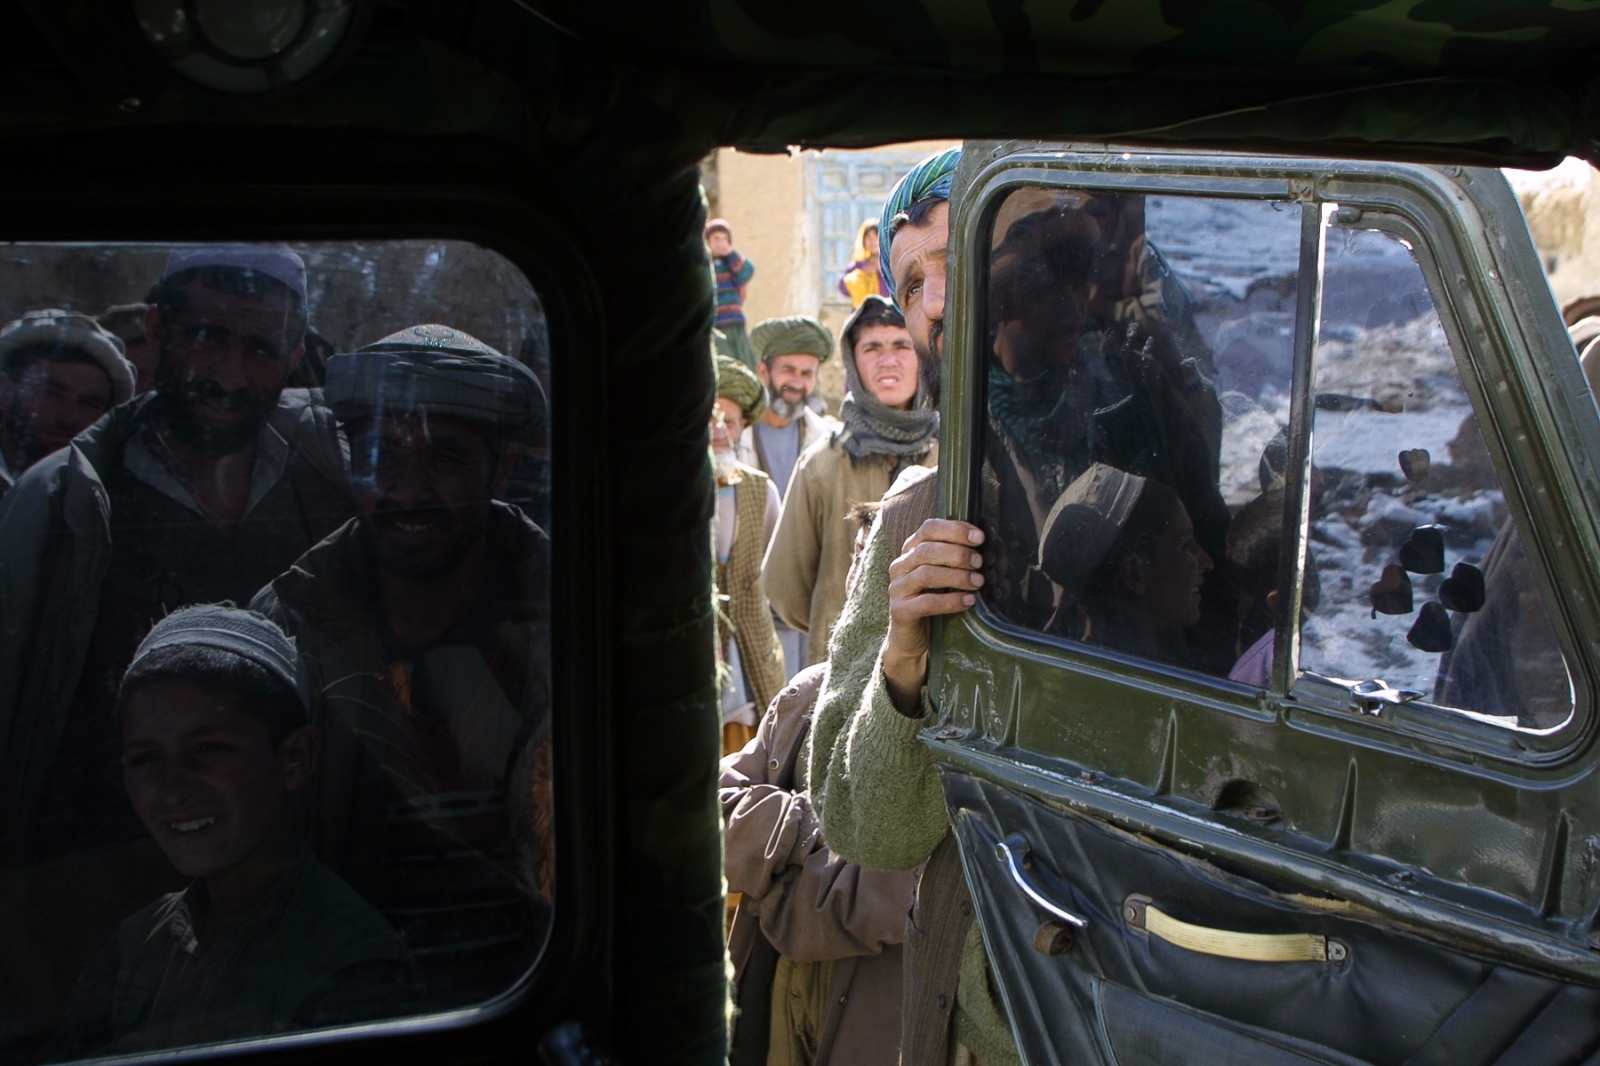 Onward to Kabul - The next morning we rent a car from the local village and...